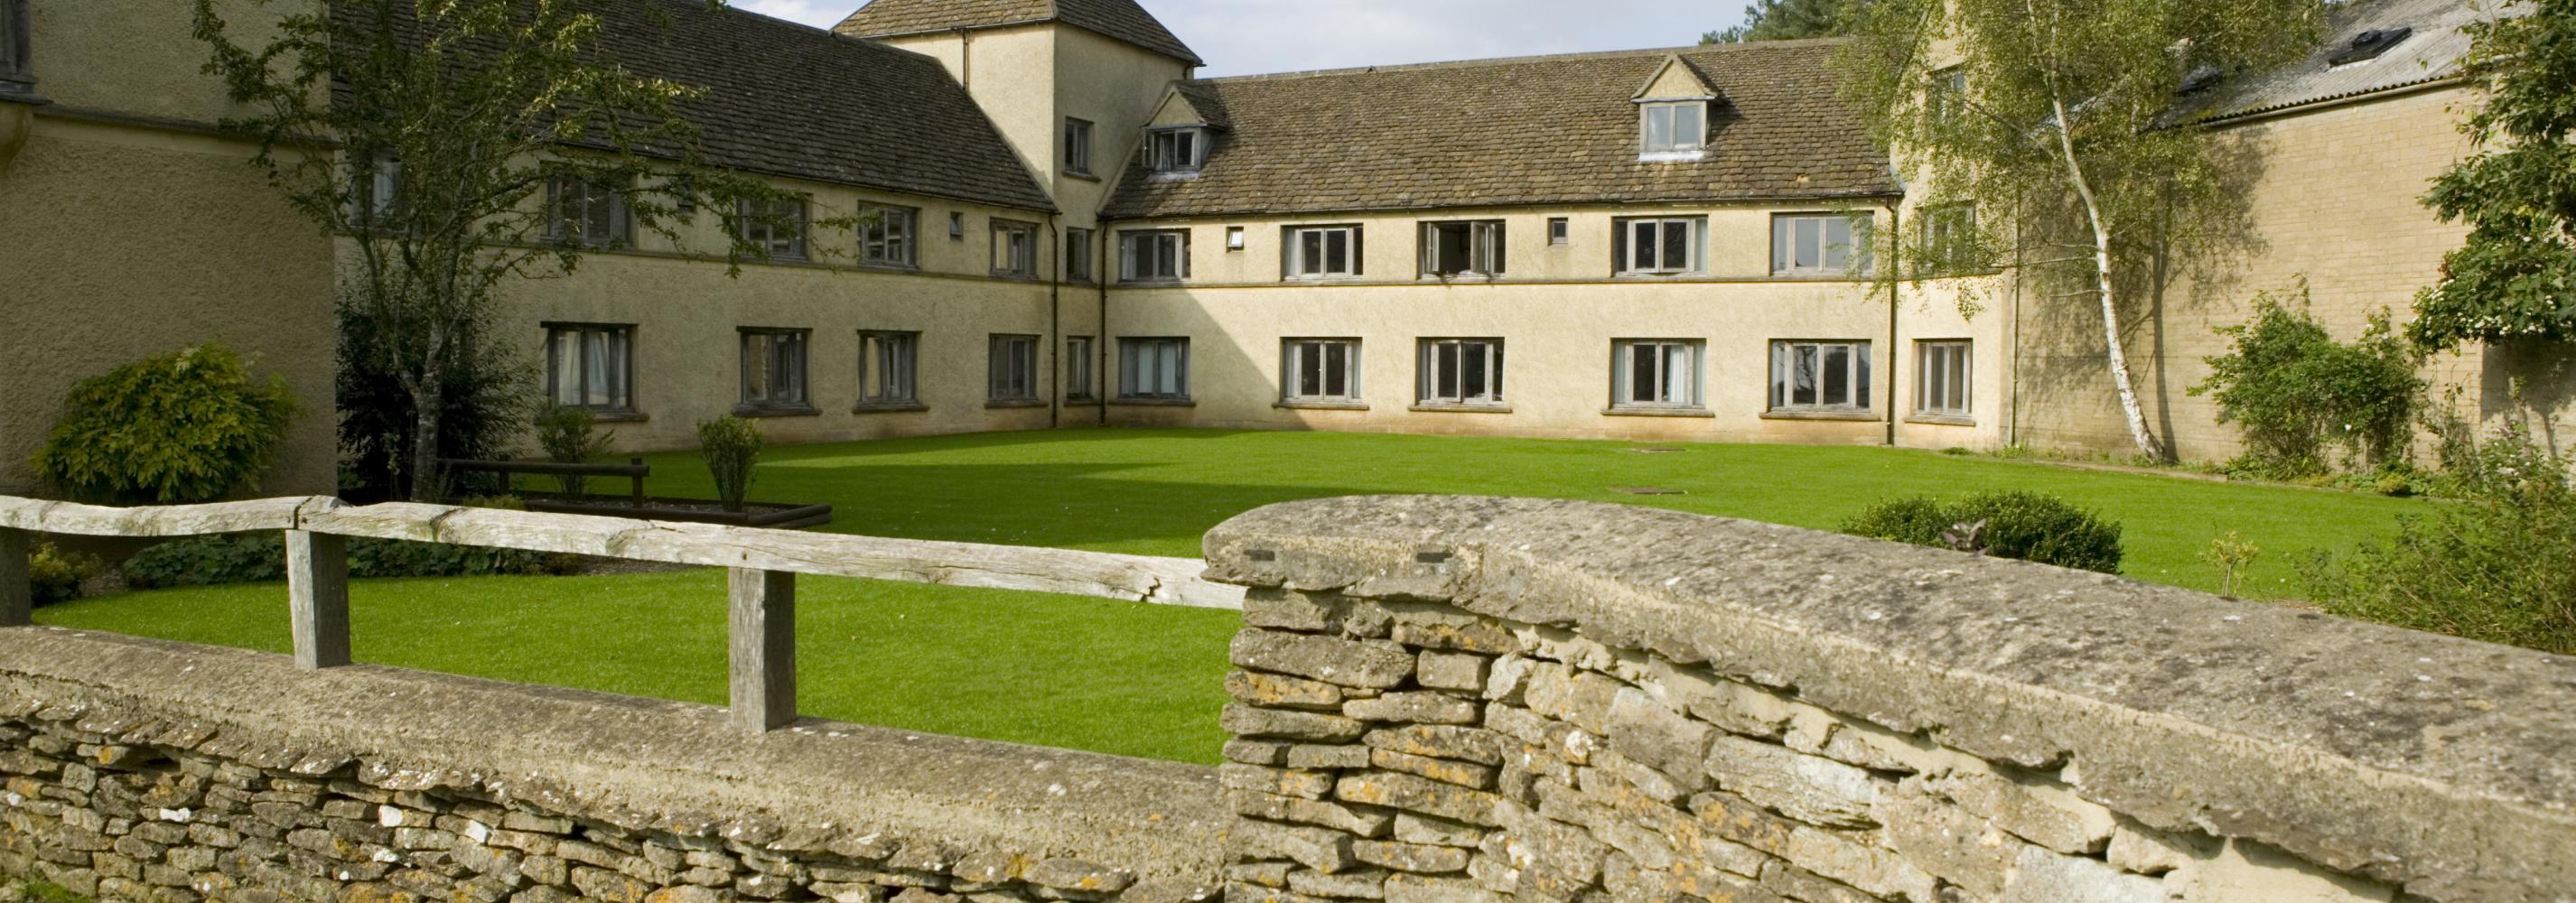 Exterior of buildings, with grassed area and a stone wall